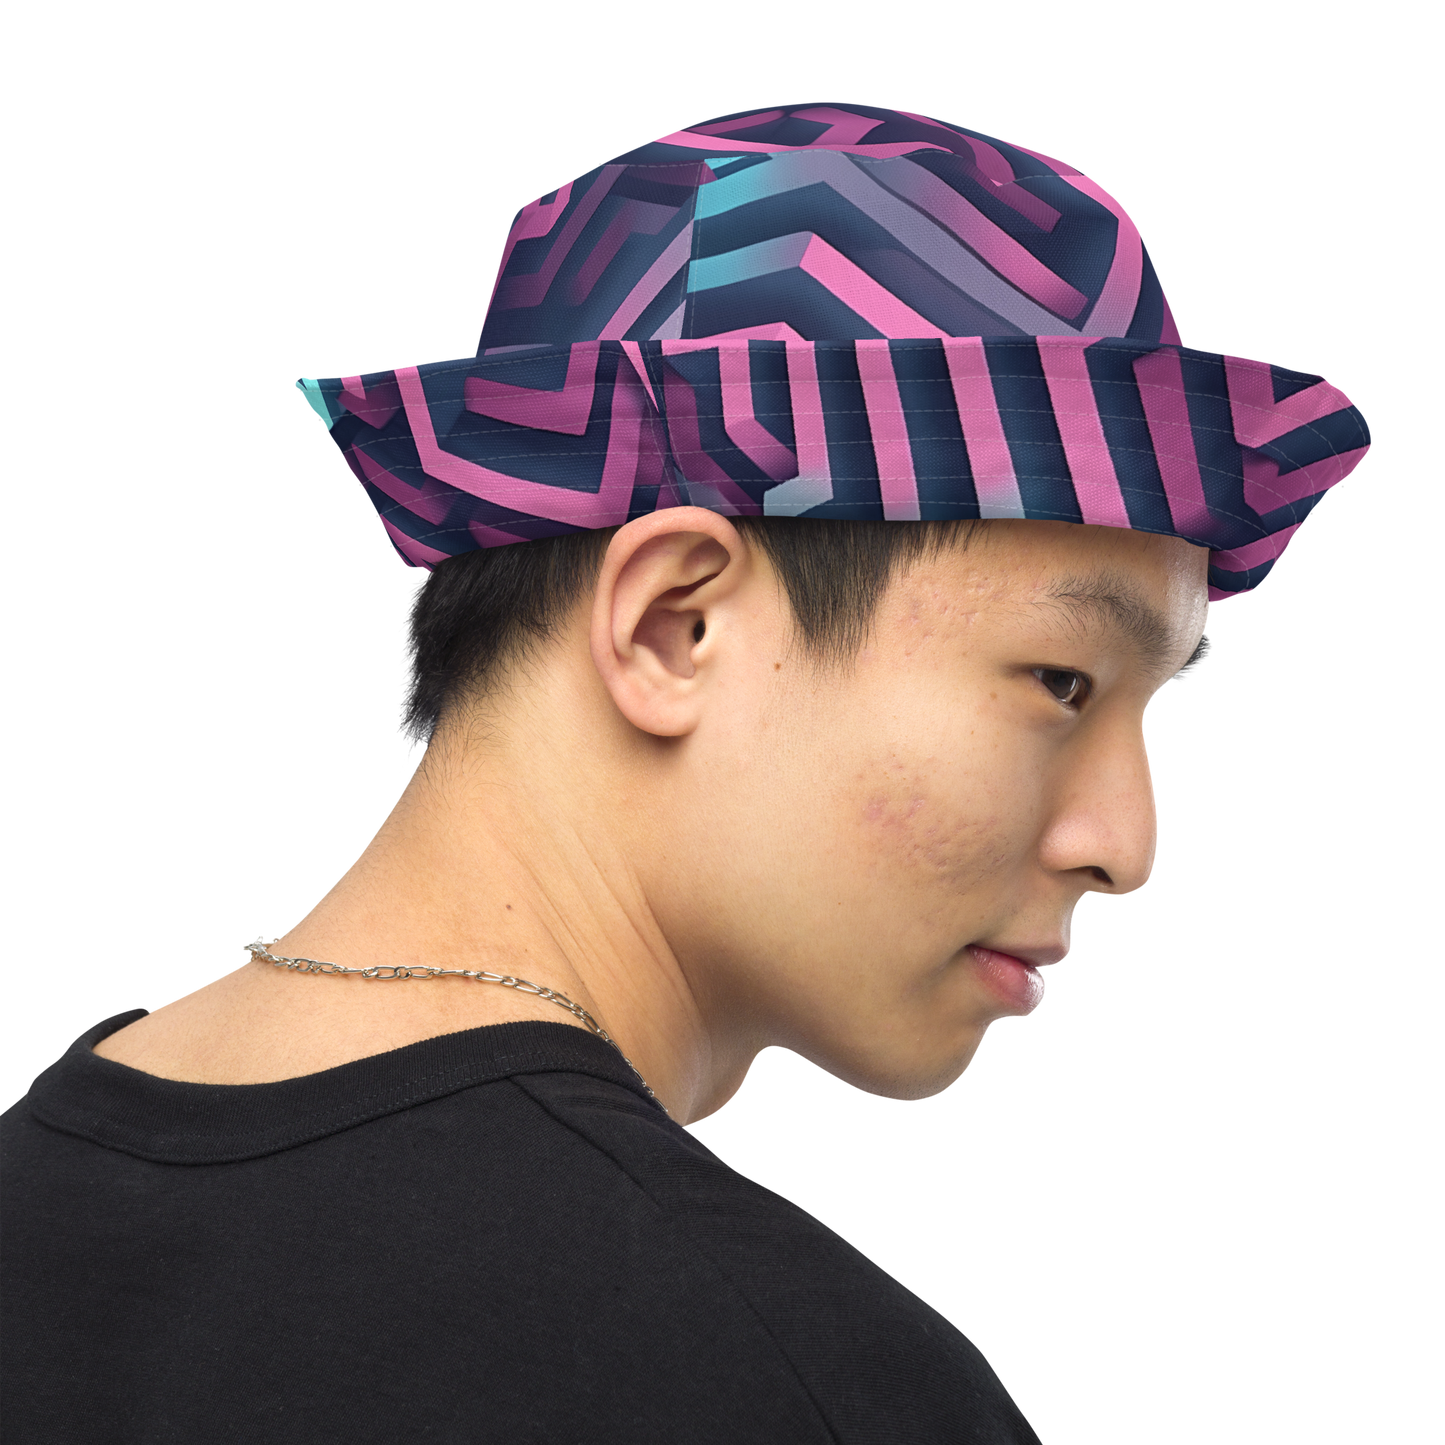 3D Maze Illusion | 3D Patterns | All-Over Print Reversible Bucket Hat - #4